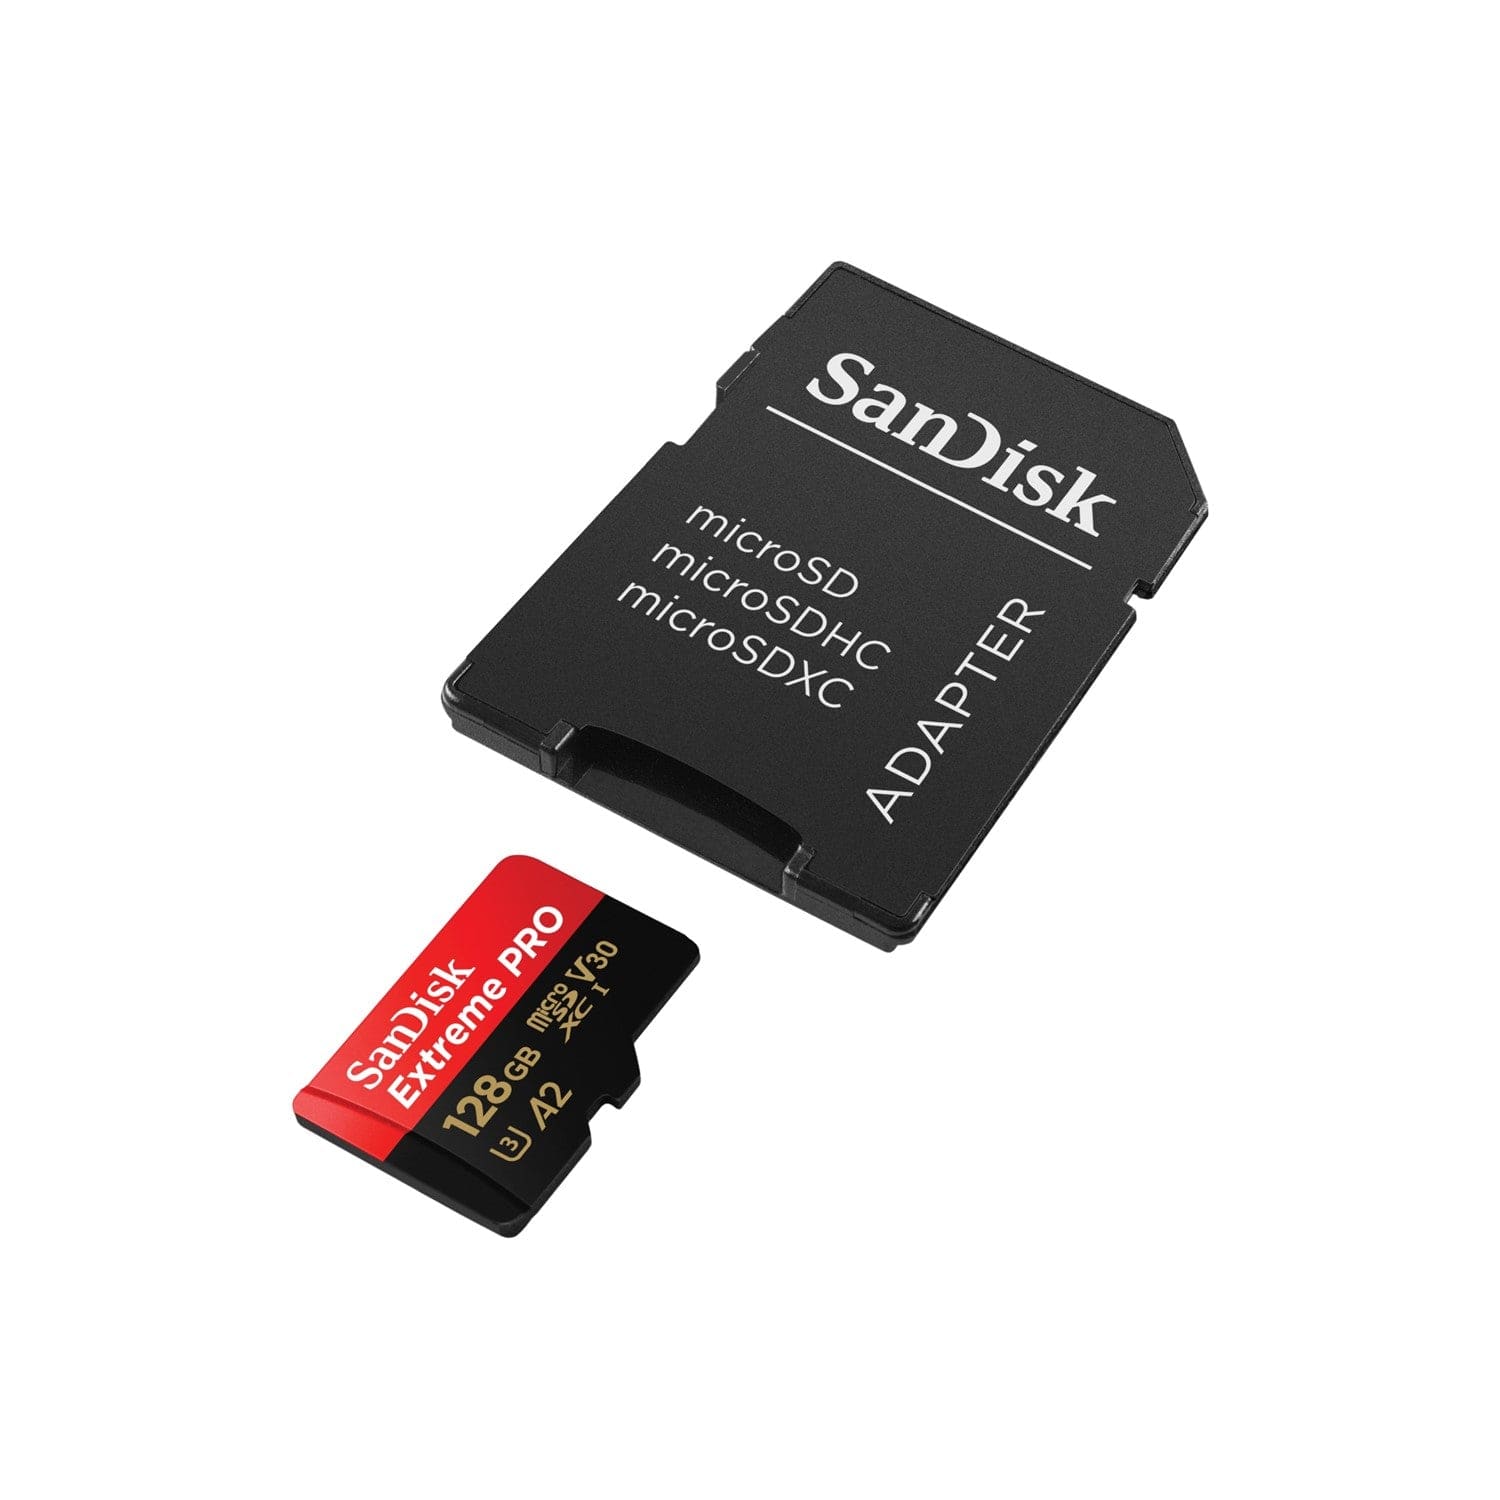 Sandisk Extreme Pro Micro SD Card 128GB UHS-I SDXC Class, 49% OFF